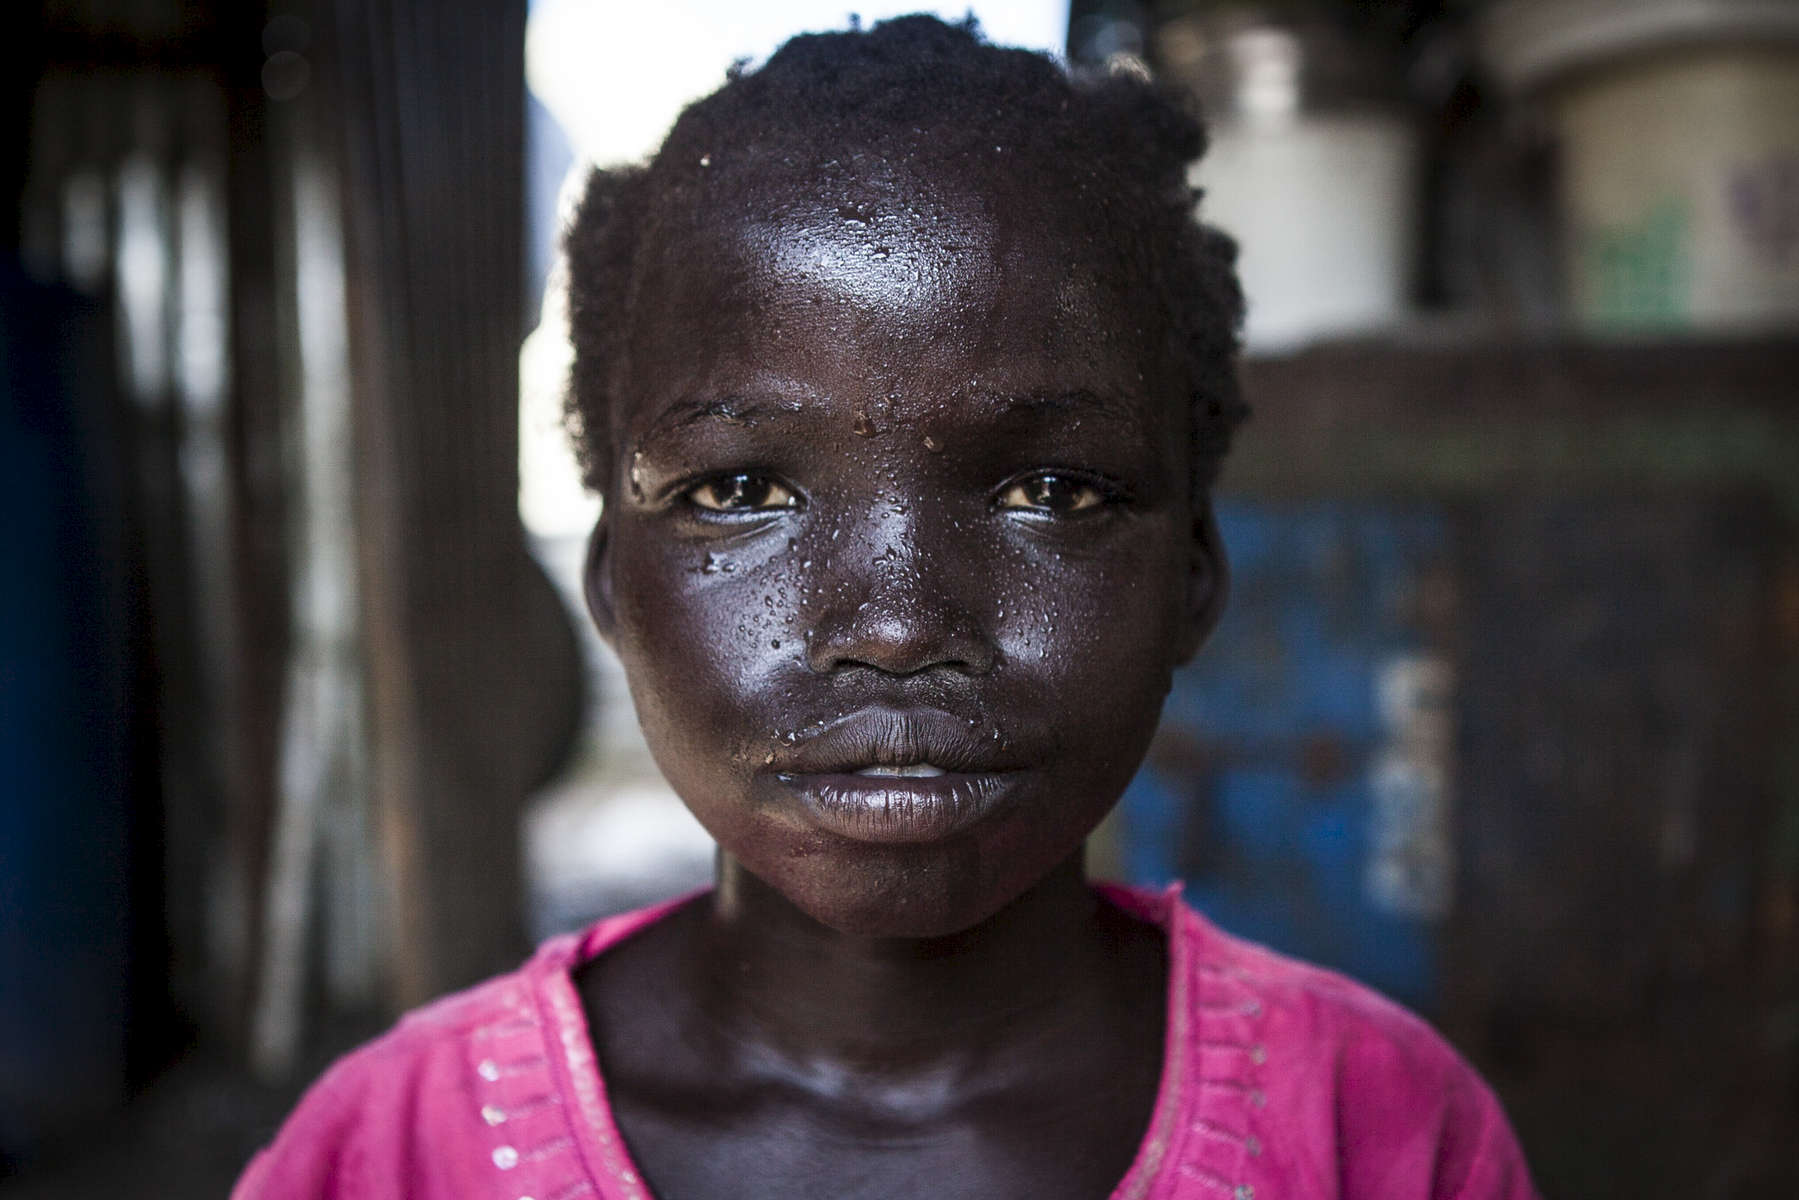 Mer, 10, covered in sweat from the afternoon heat before the rain, sits in her home in the Protection of Civilians (POC) site at the UNMISS base in Malakal, South Sudan on Friday, July 8, 2016.  